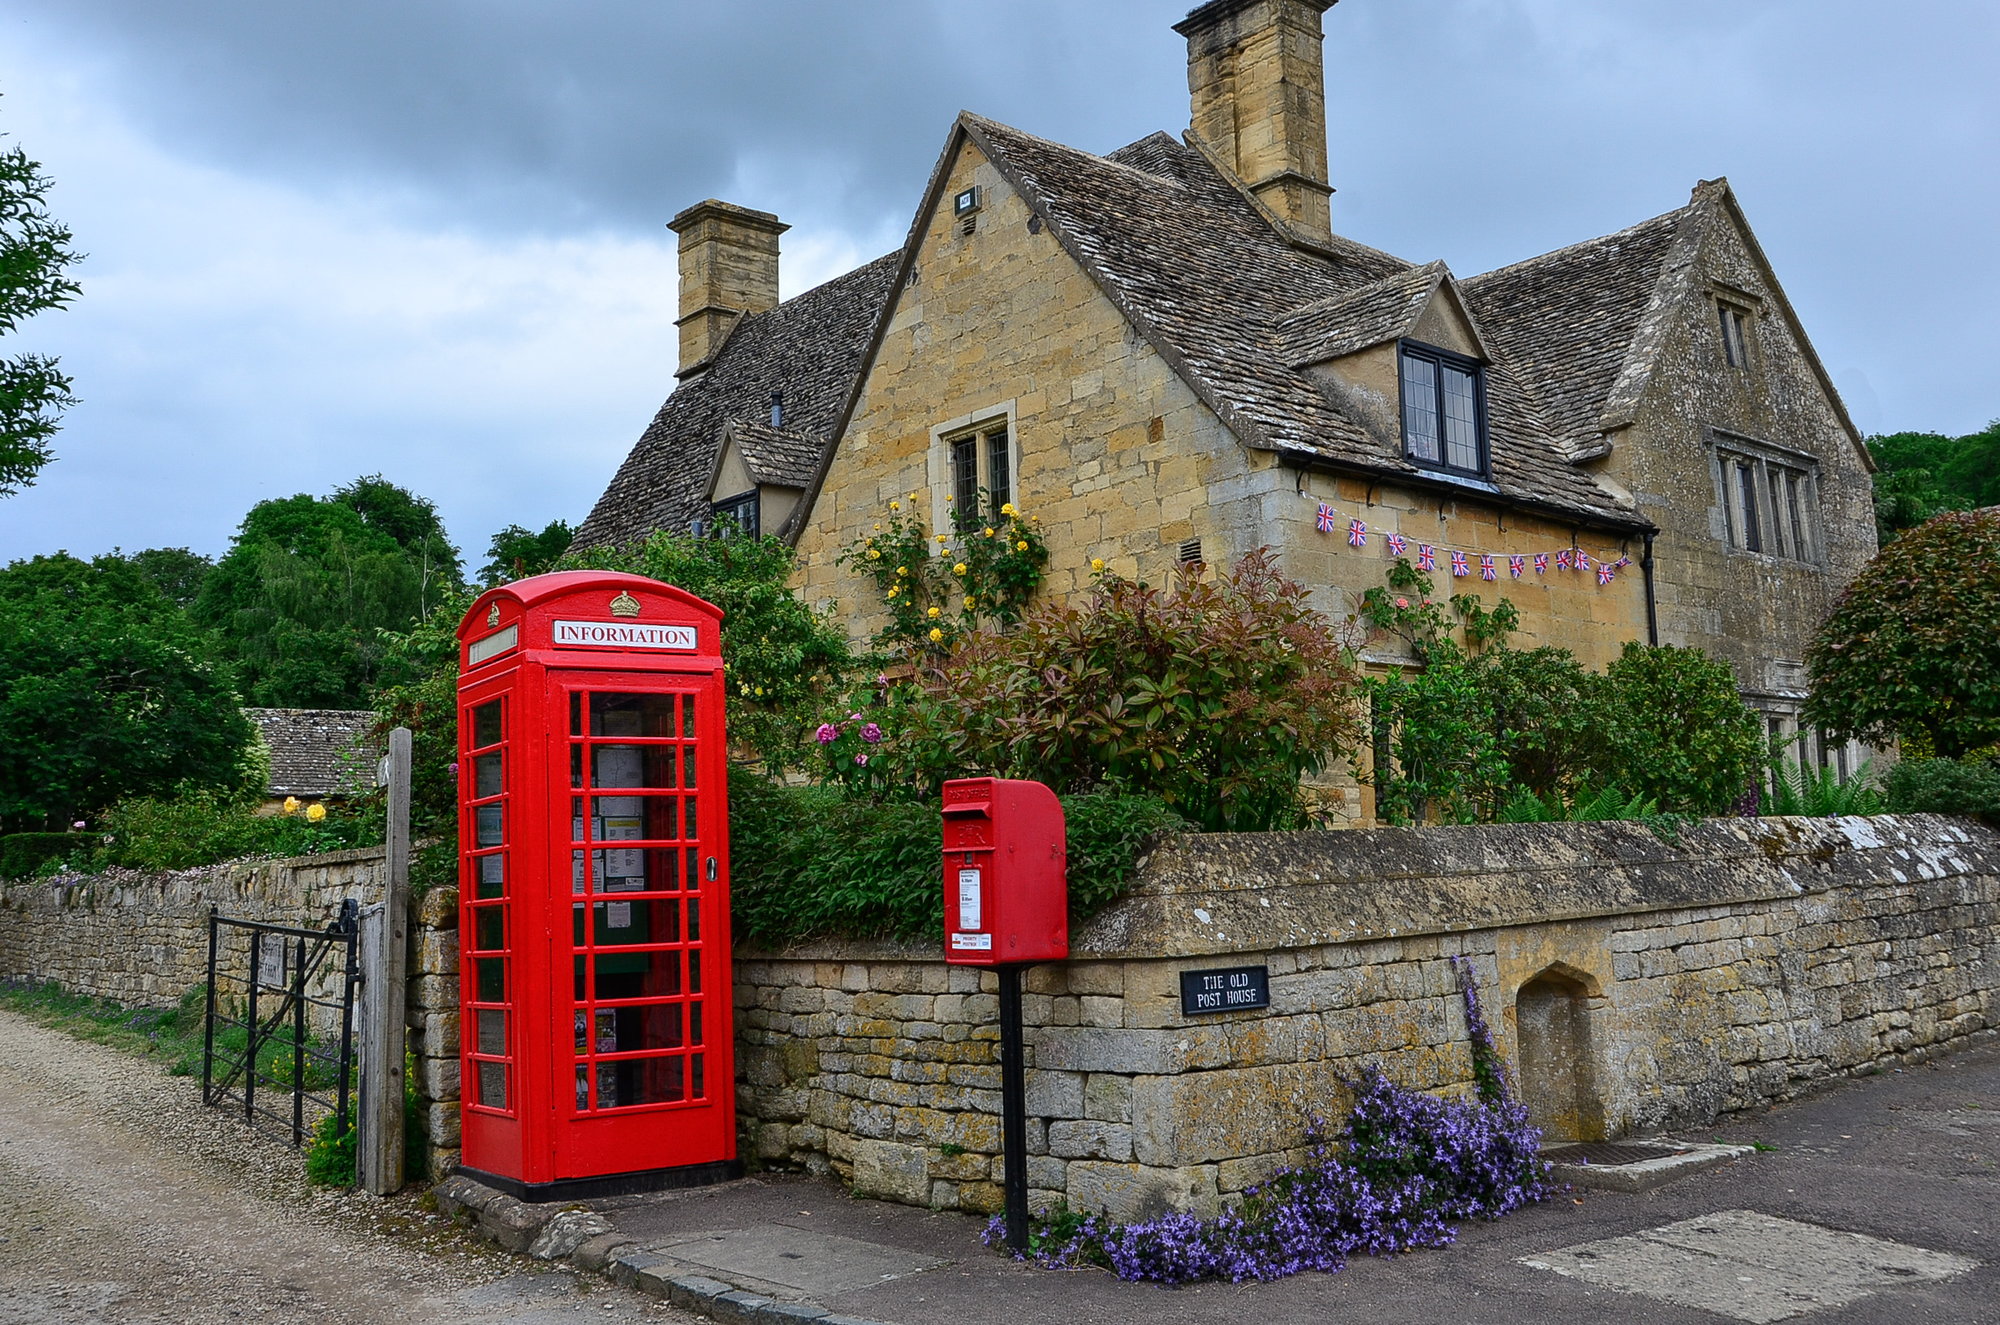 Jack in the Green: a Cotswolds TR - Fodor's Travel Talk Forums